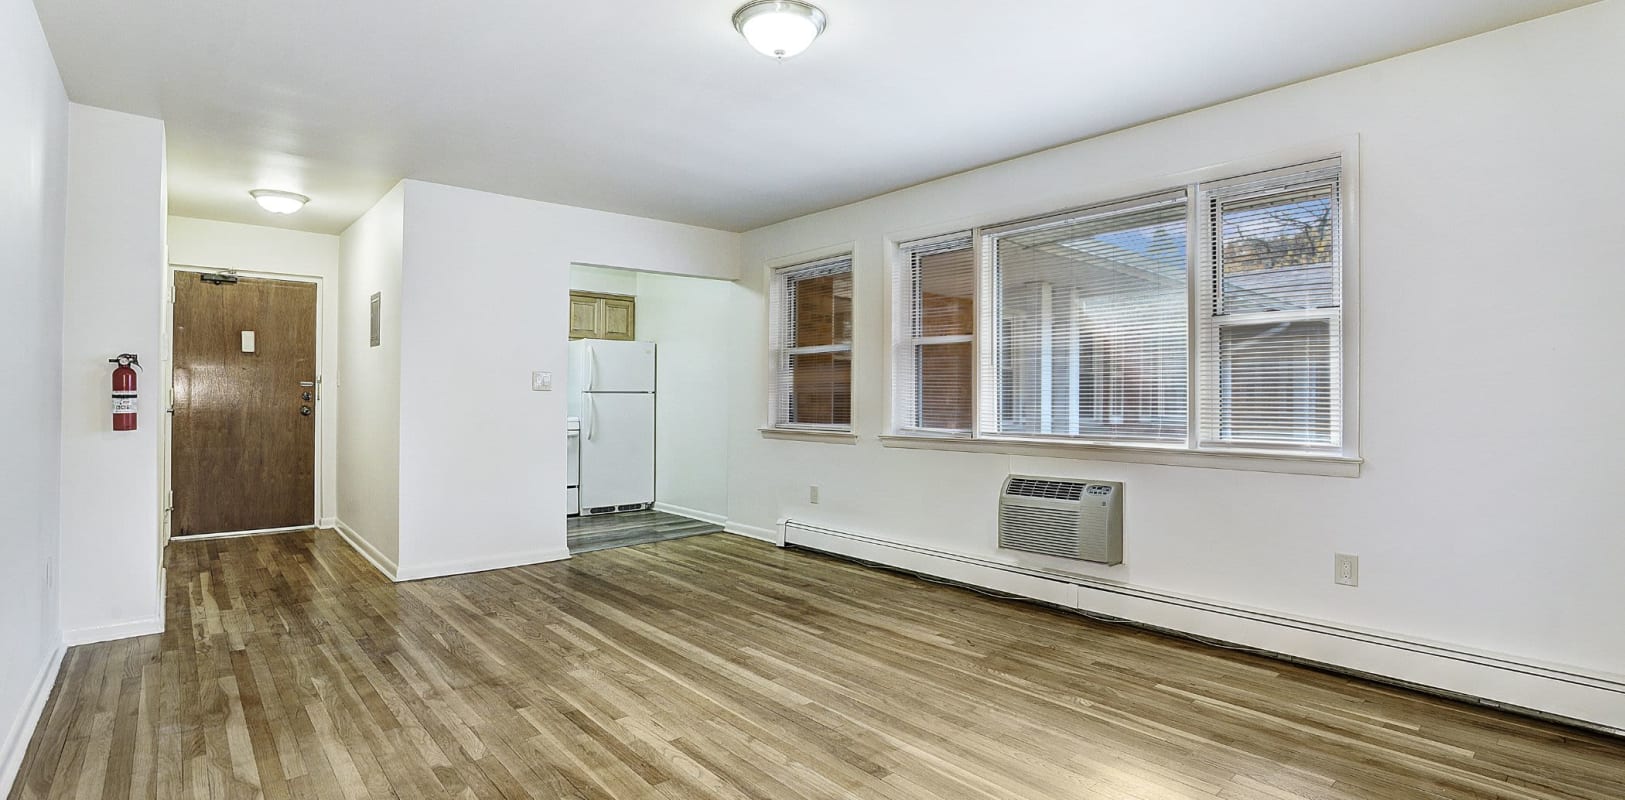 Living room with hardwood flooring at Garret Village Apartments in Clifton, New Jersey